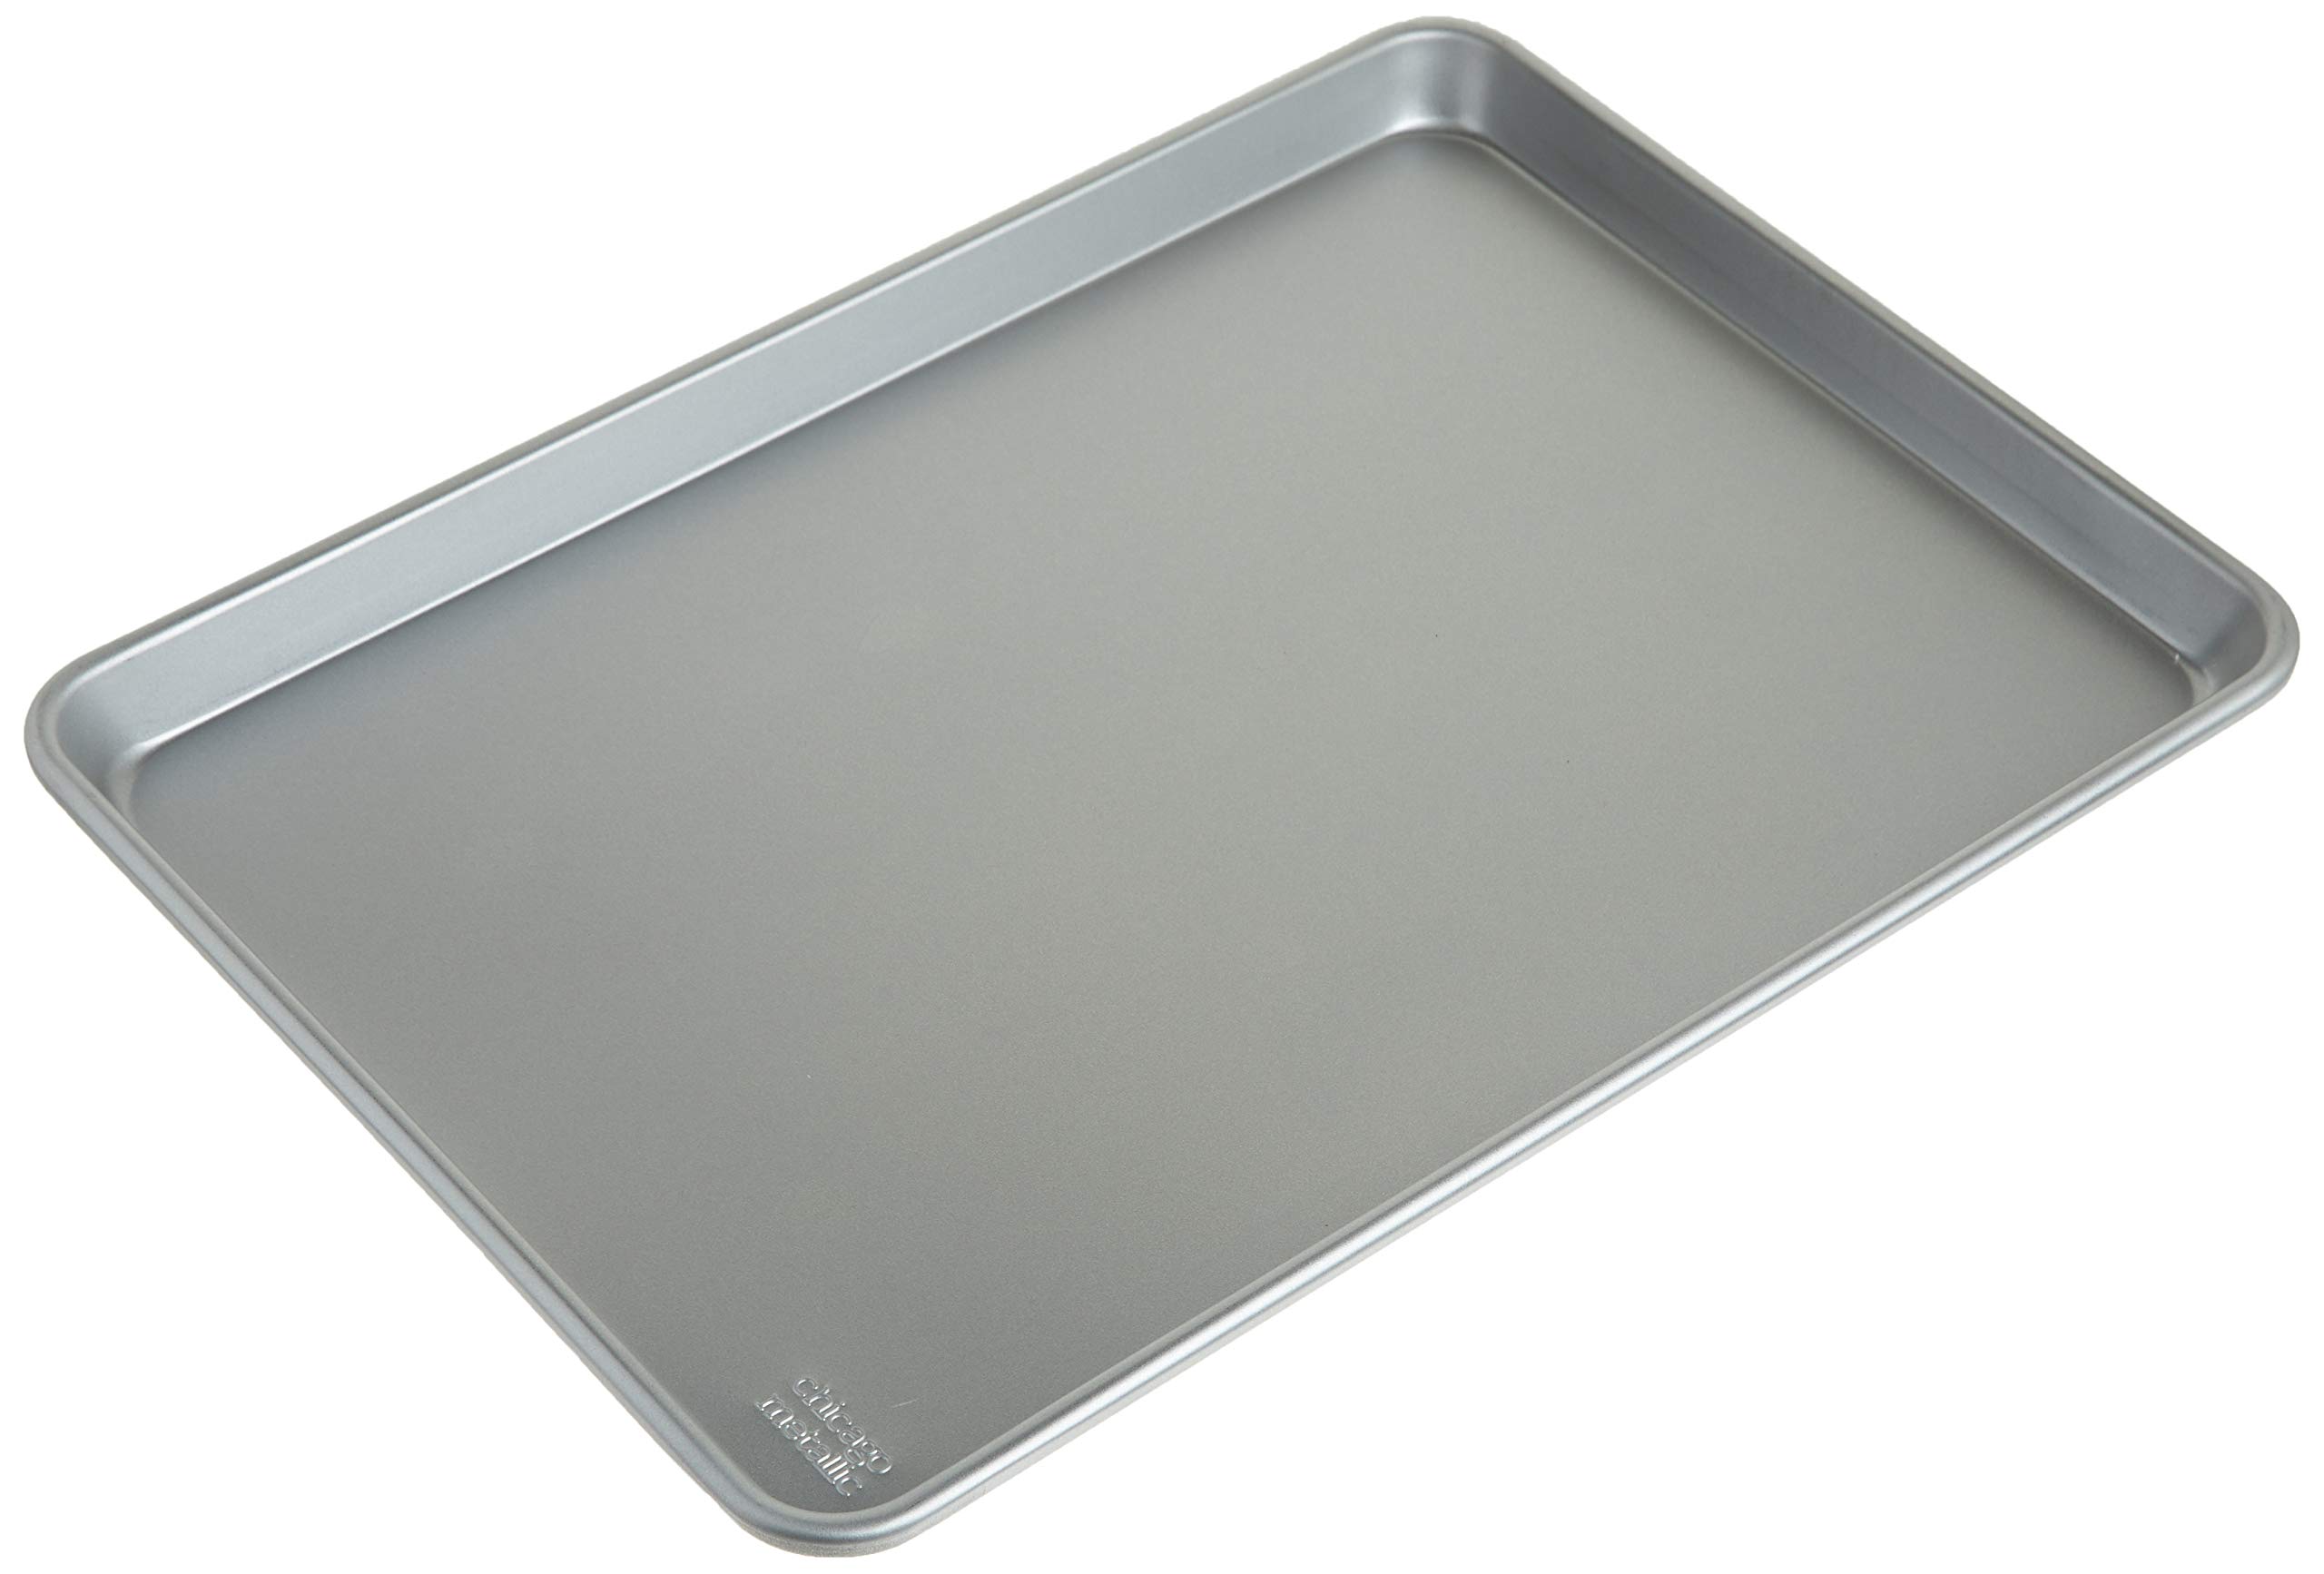 Chicago Metallic Commercial II Traditional Uncoated 16-3/4 by 12-Inch Jelly-Roll Pan, Set of 2 -